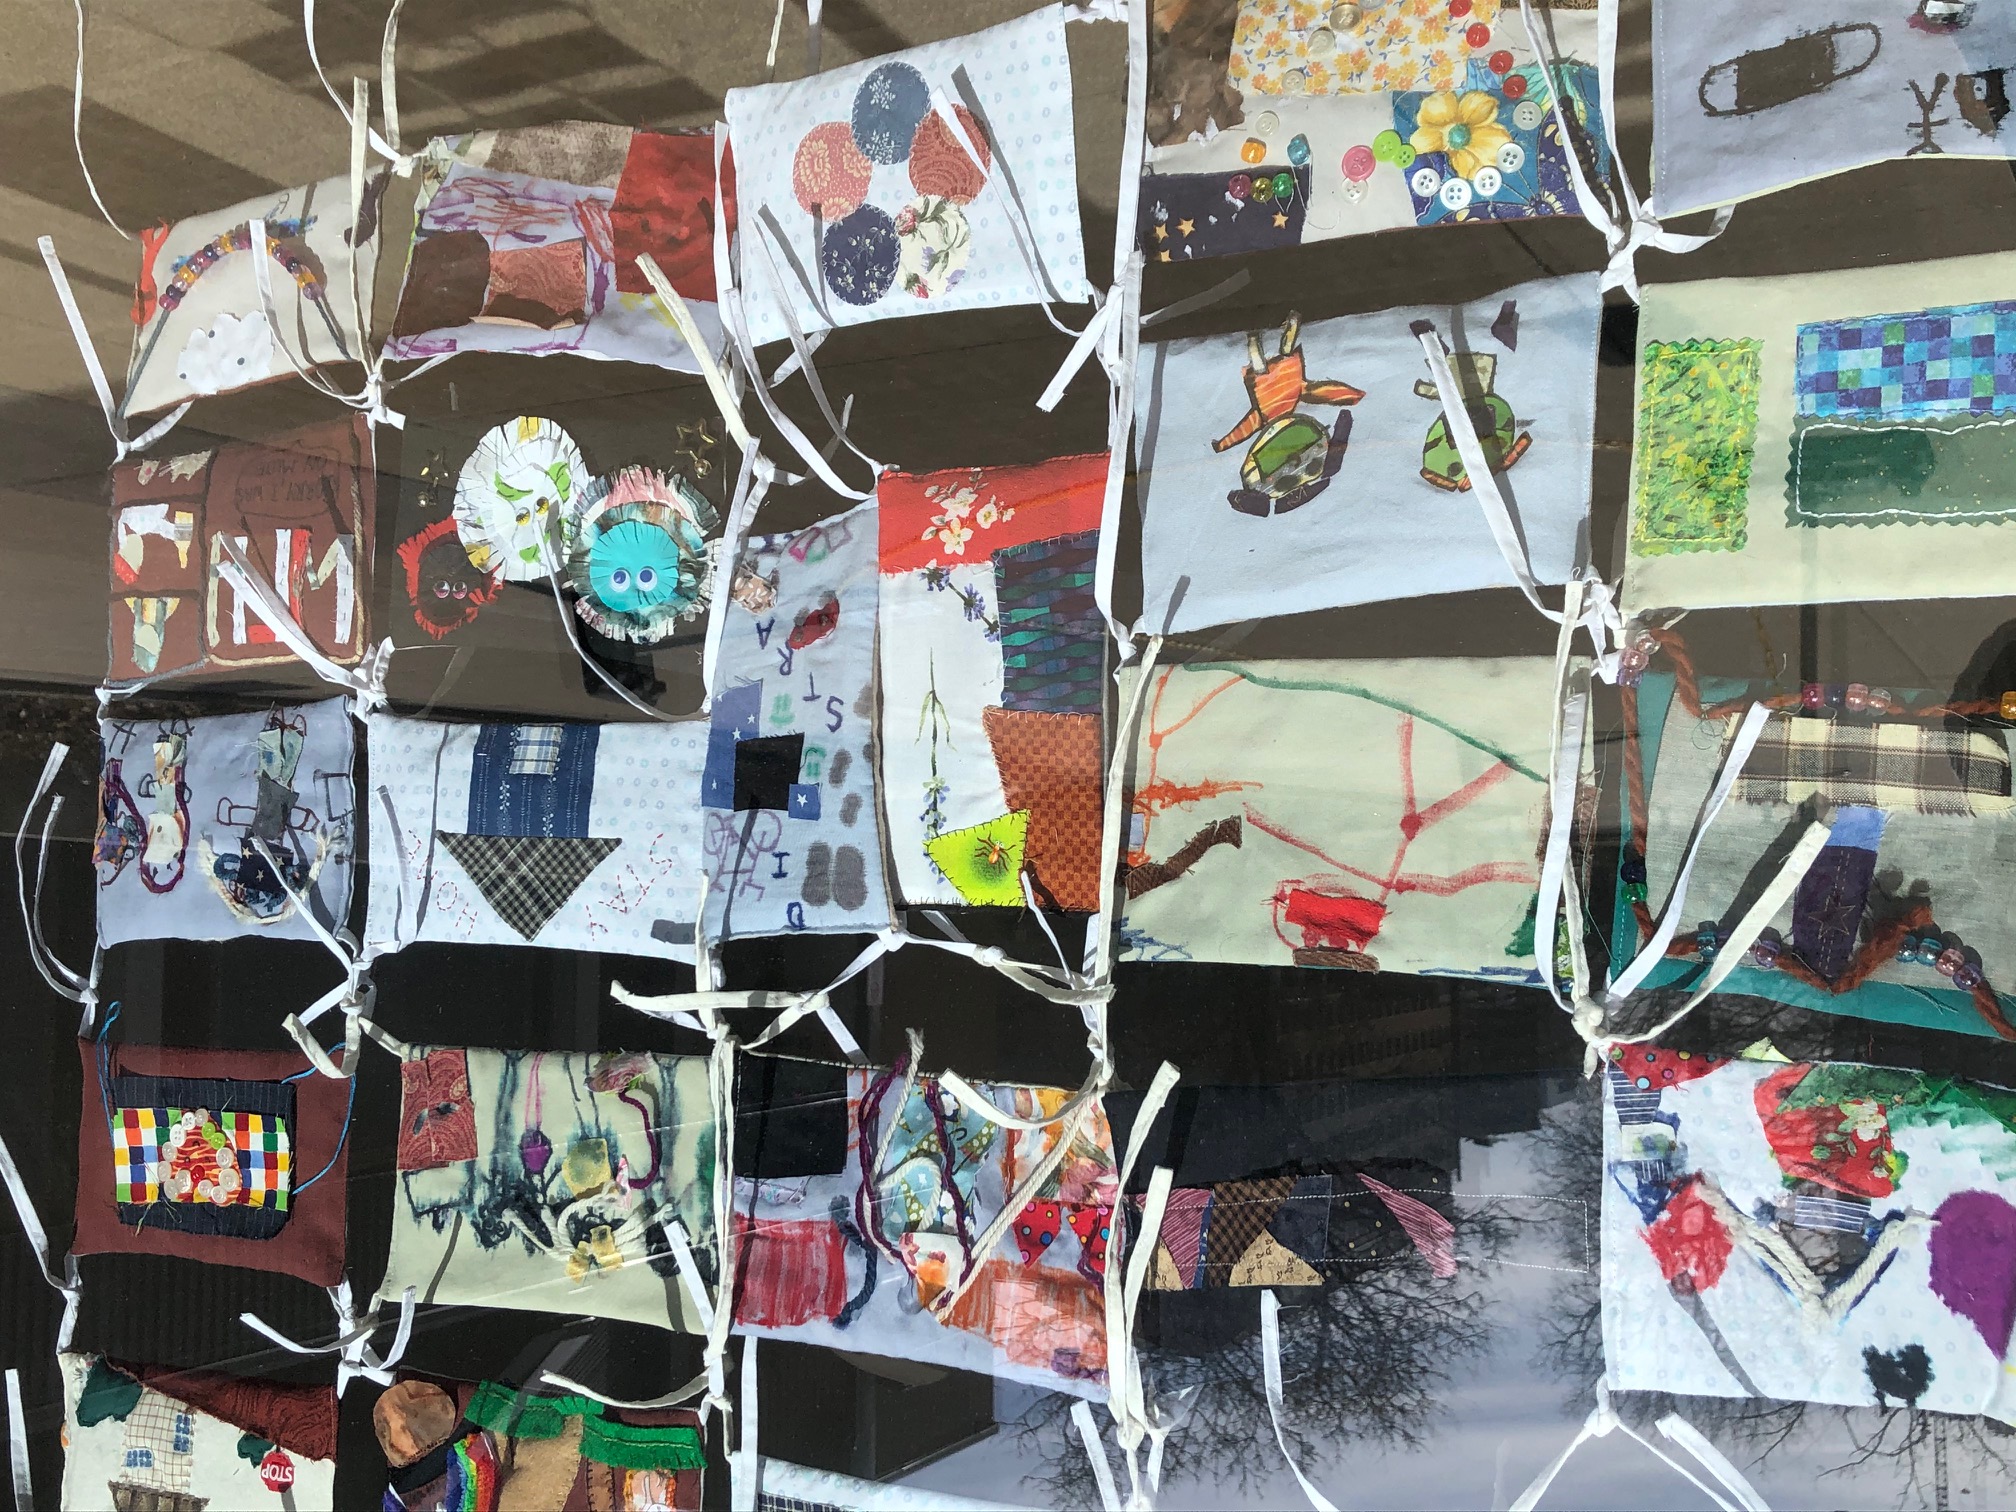 View of community quilt made of face masks tied together and hanging behind a window